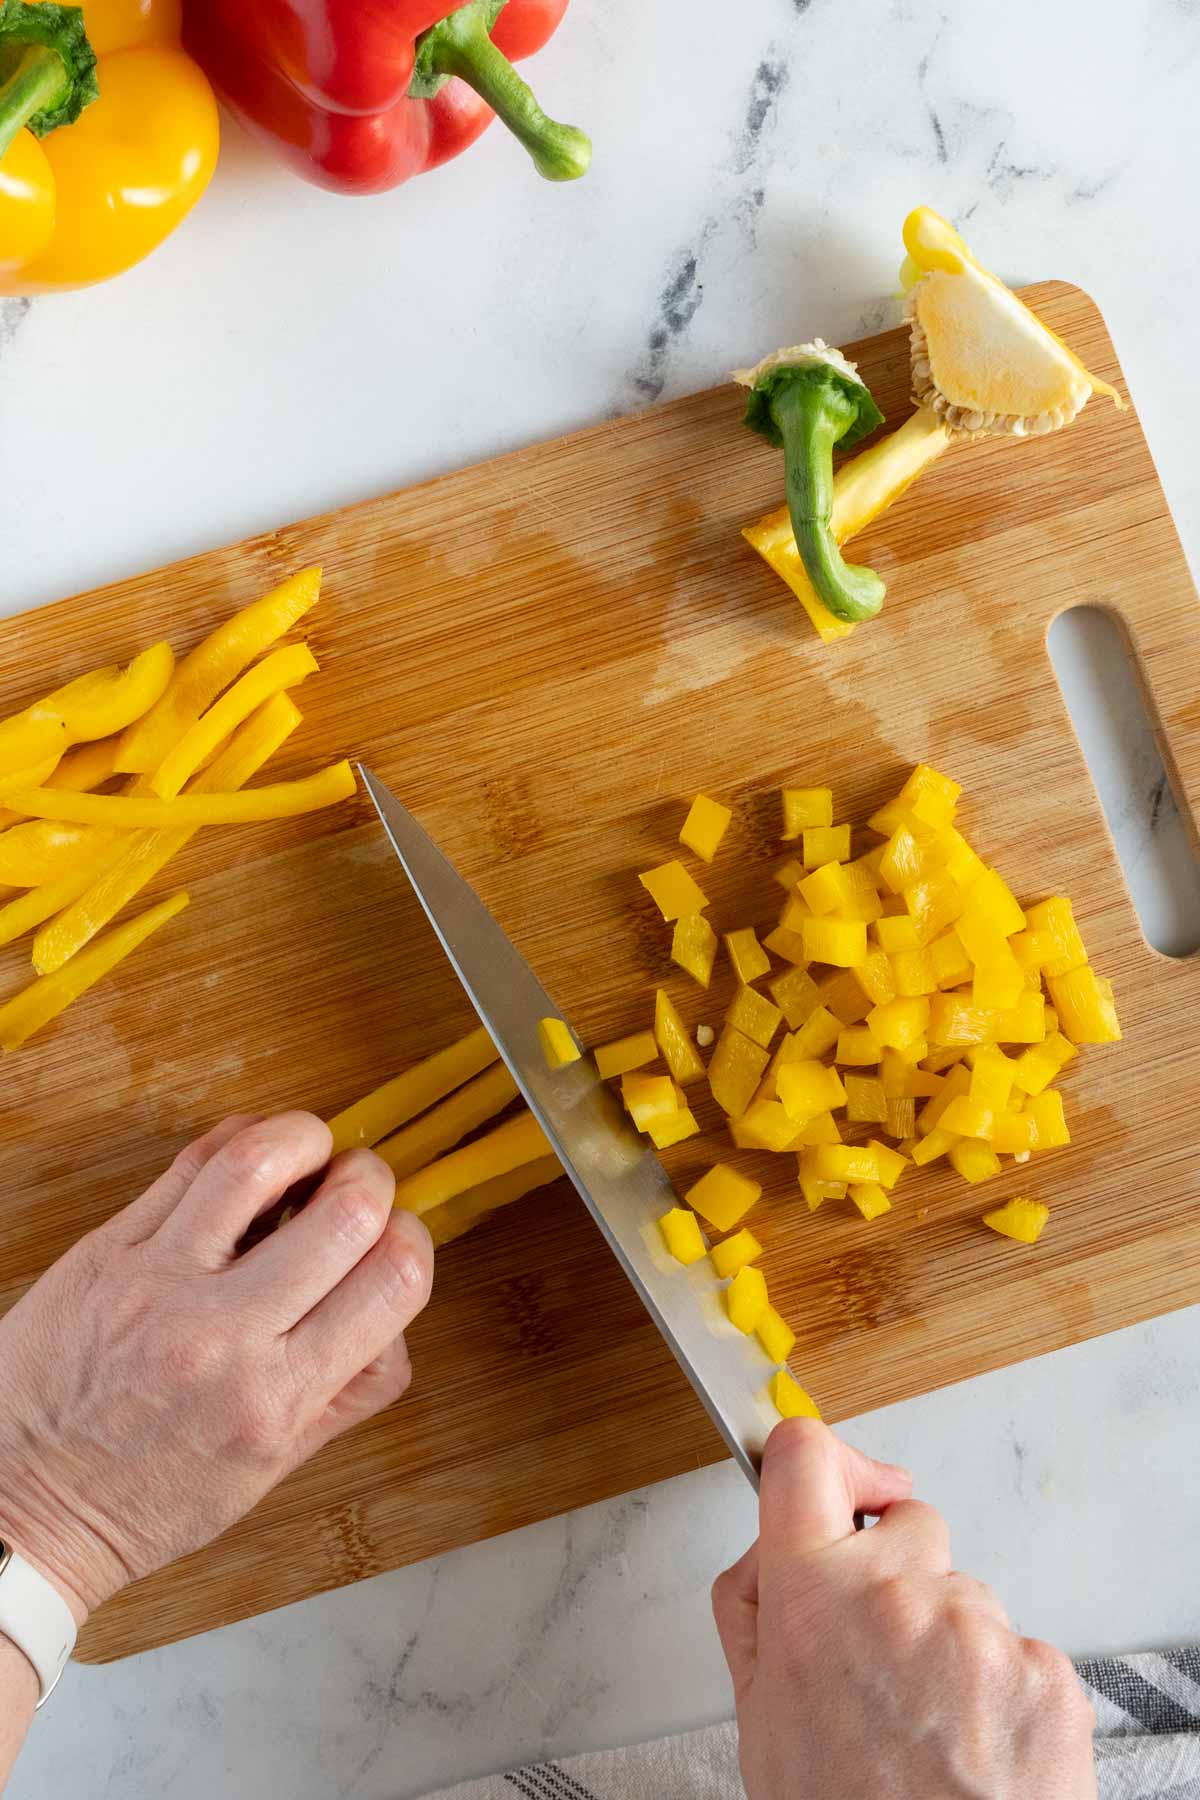 Dicing a yellow pepper.